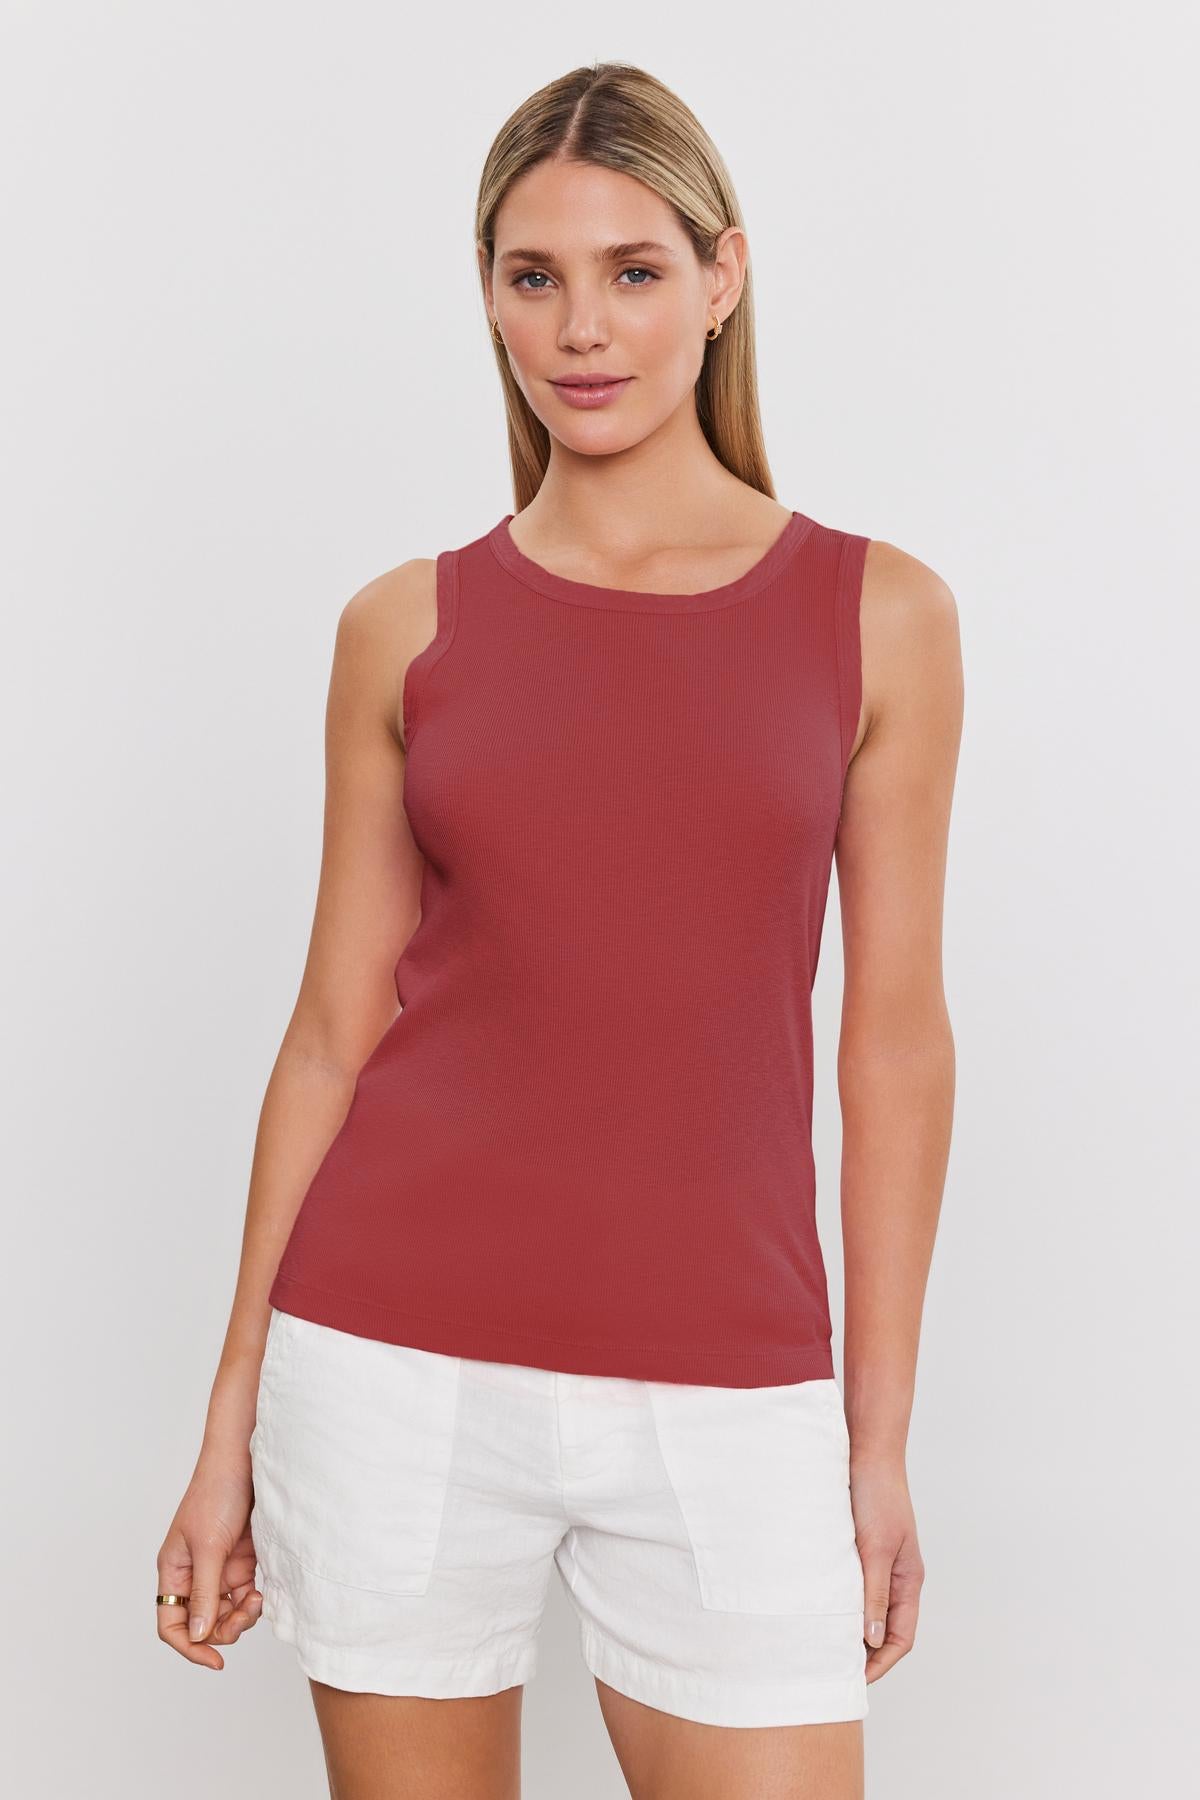 A woman with straight blonde hair is wearing a sleeveless red top and white shorts, standing against a plain white background. The soft-textured, slub knit fabric of her Velvet by Graham & Spencer MAXIE RIBBED TANK TOP adds a casual yet chic feel to her outfit.-37241154535617